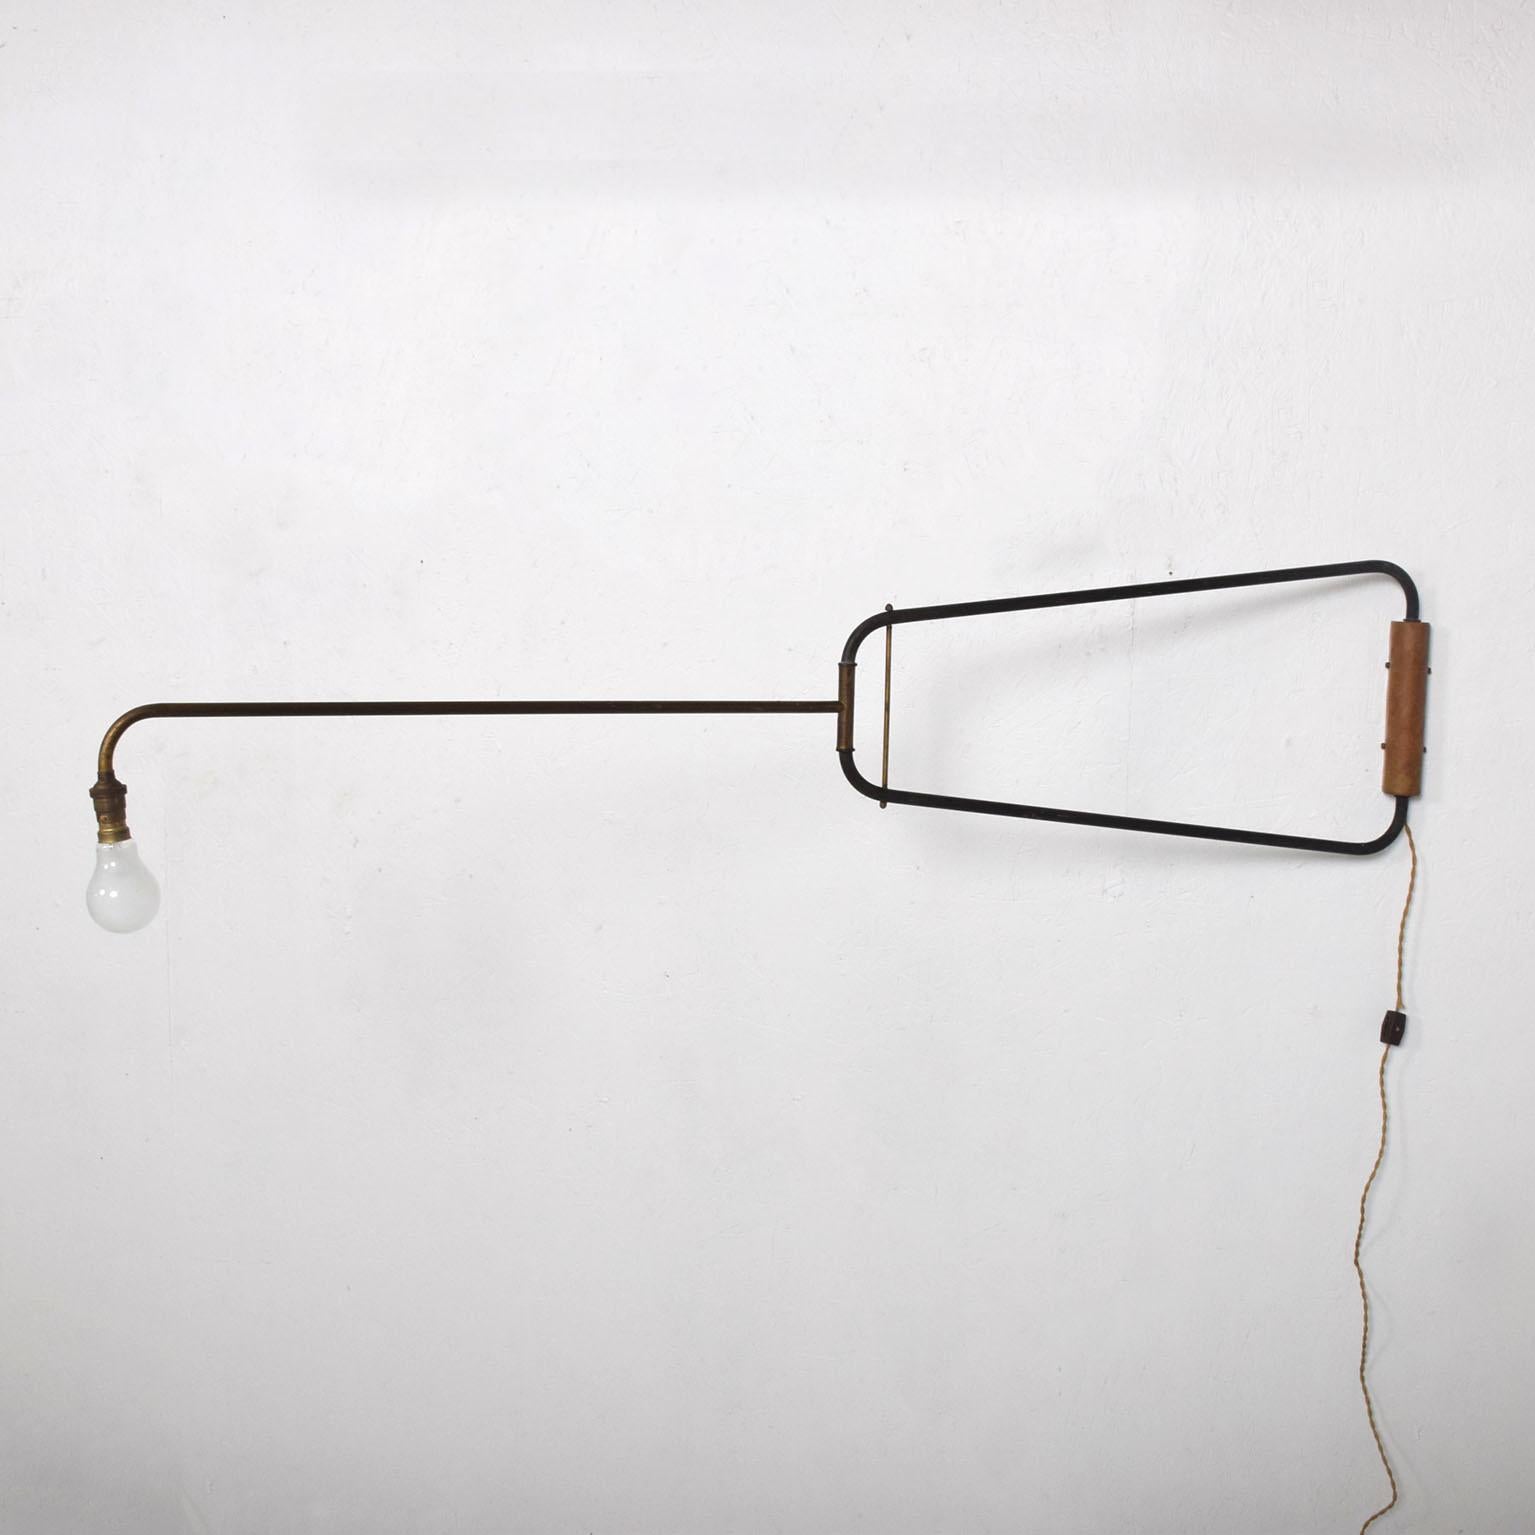 Minimalist French Industrial Wall Sconce Jean Prouvé Mid-Century Modern Minimalism, 1950s